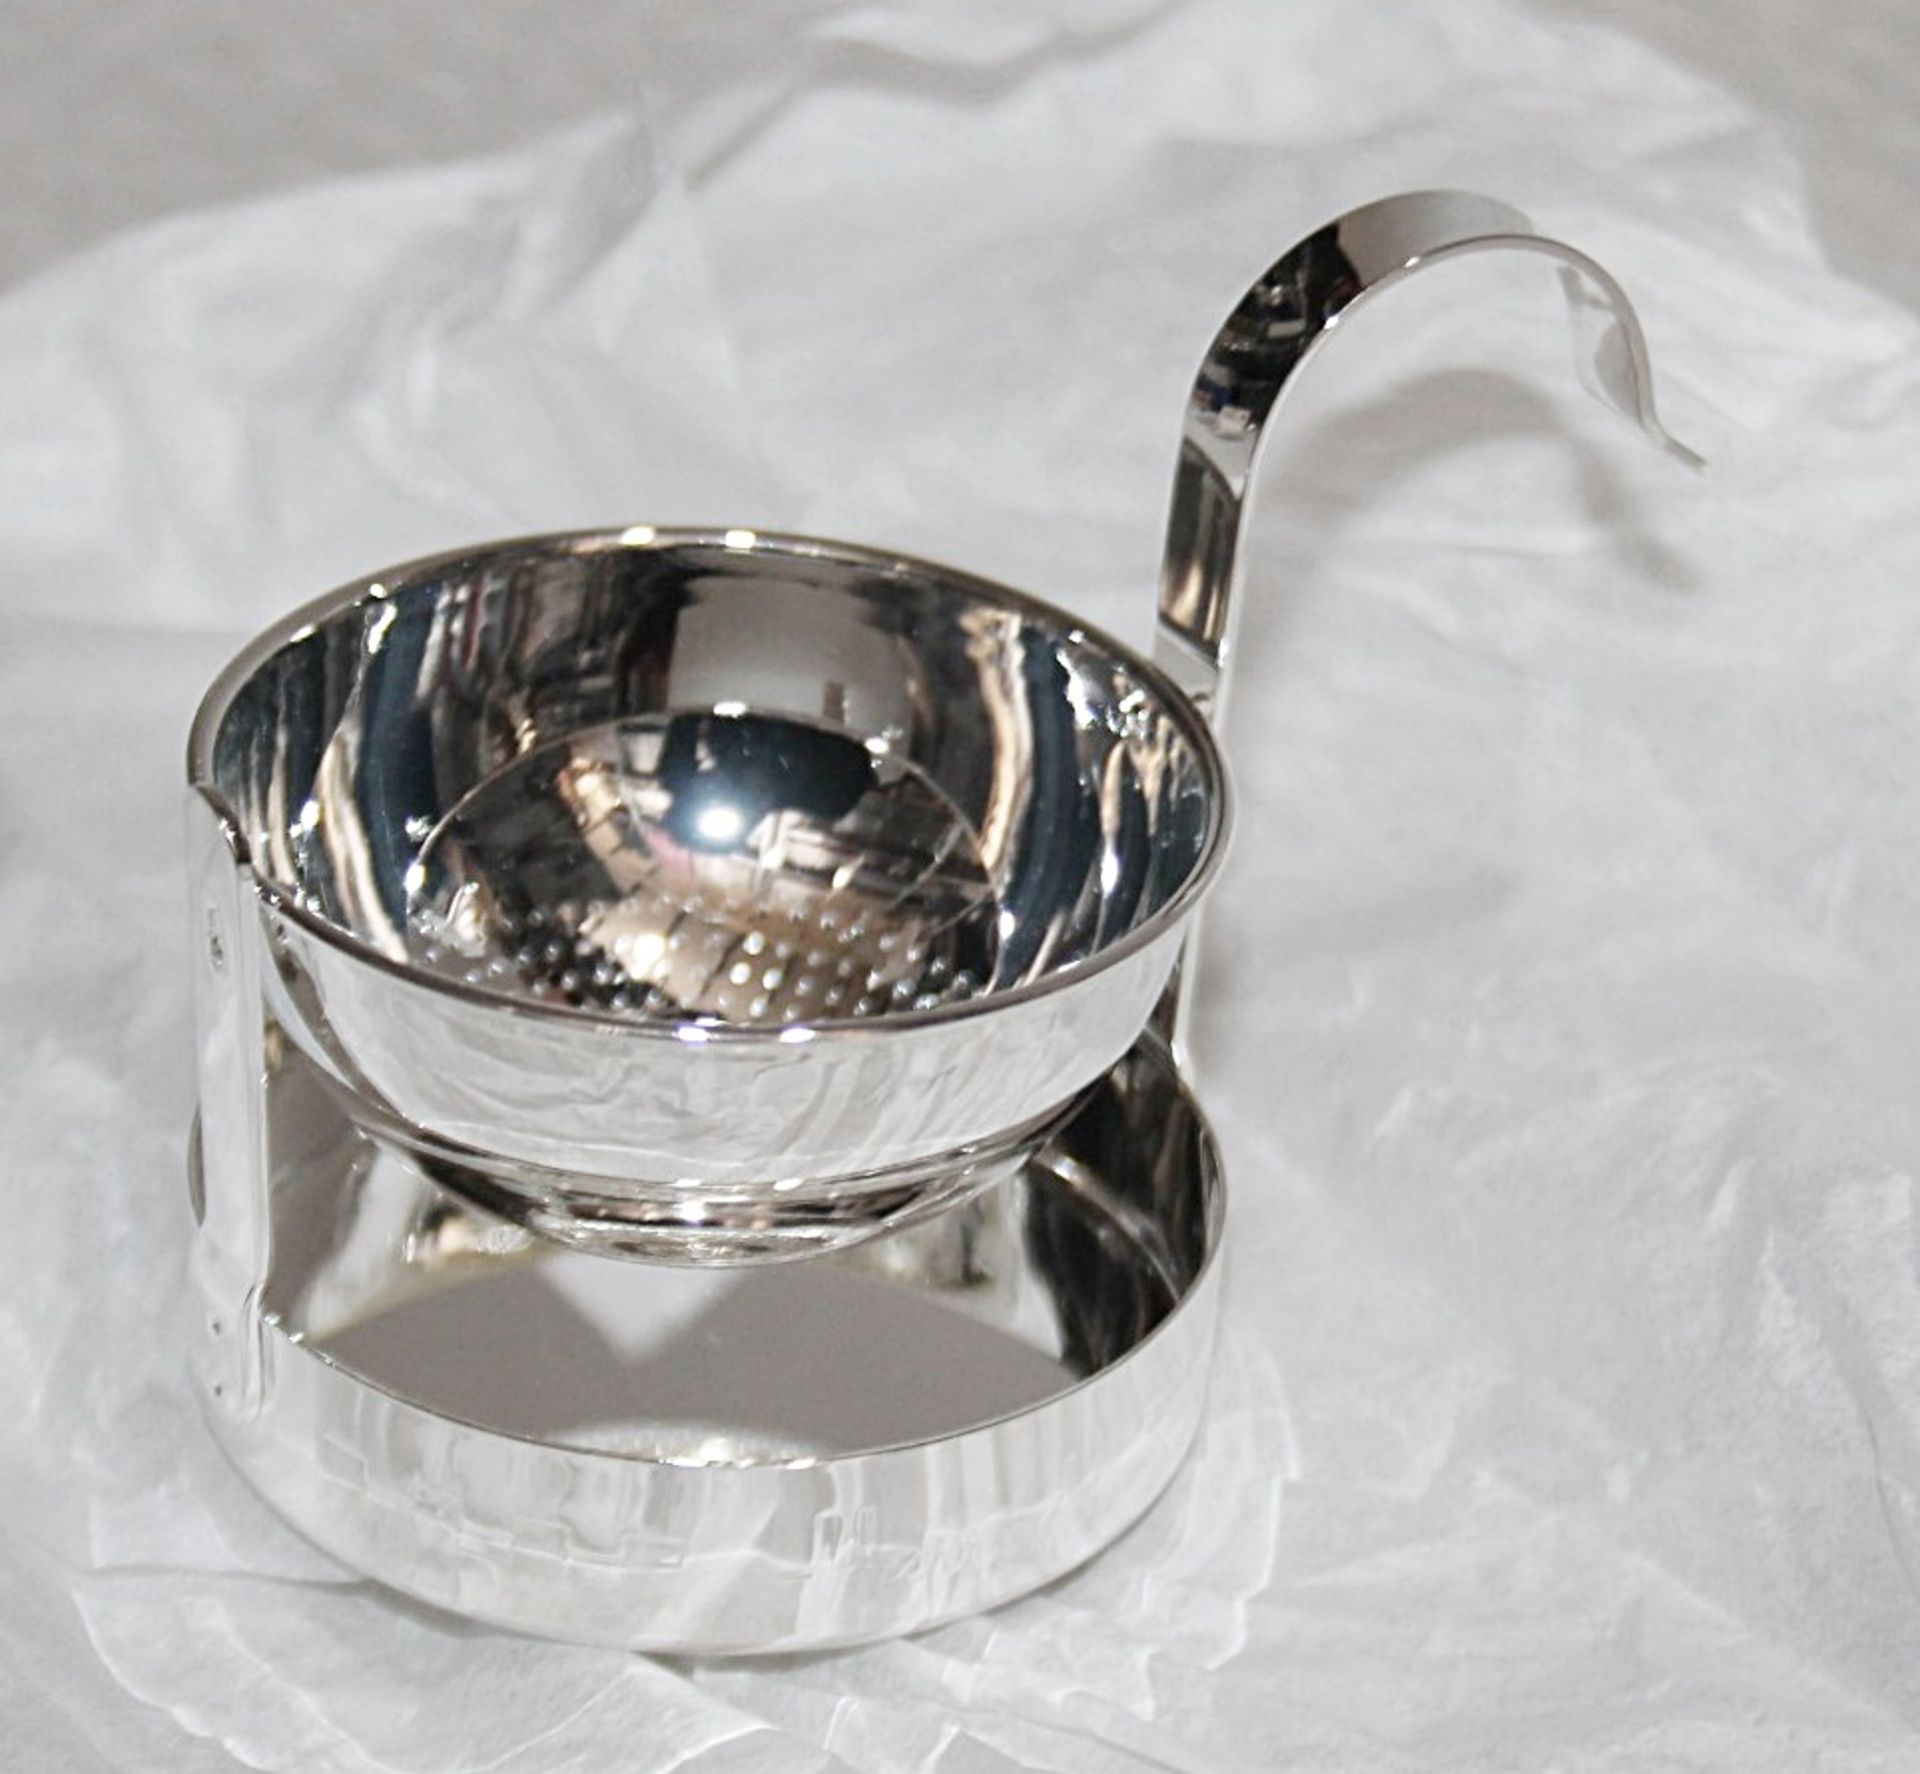 1 x HARRODS Silver-Plated Revolving Strainer - Unused Boxed Stock - Ref: HAS579/FEB22/WH2/C6 - CL987 - Image 3 of 6